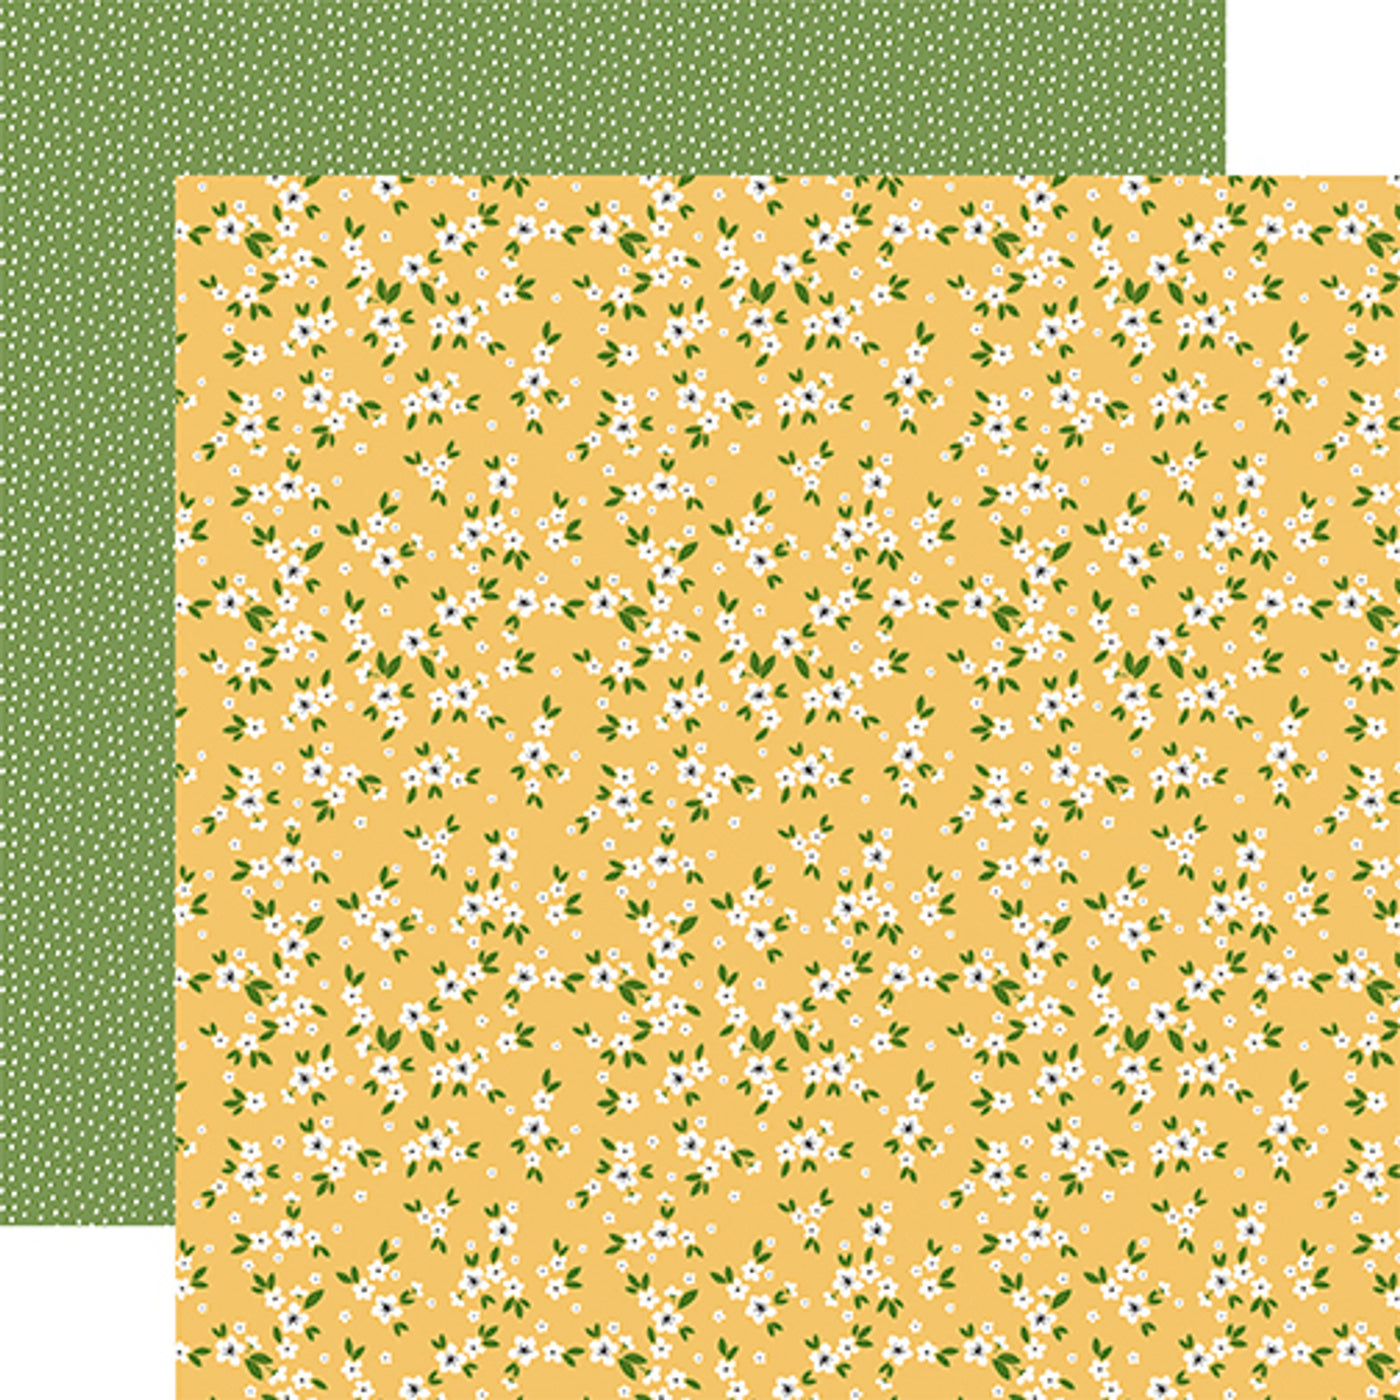 12x12 double-sided patterned paper. (Side A - little white flowers with green leaves on a yellow background, Side B - little white polka dots on a green background)